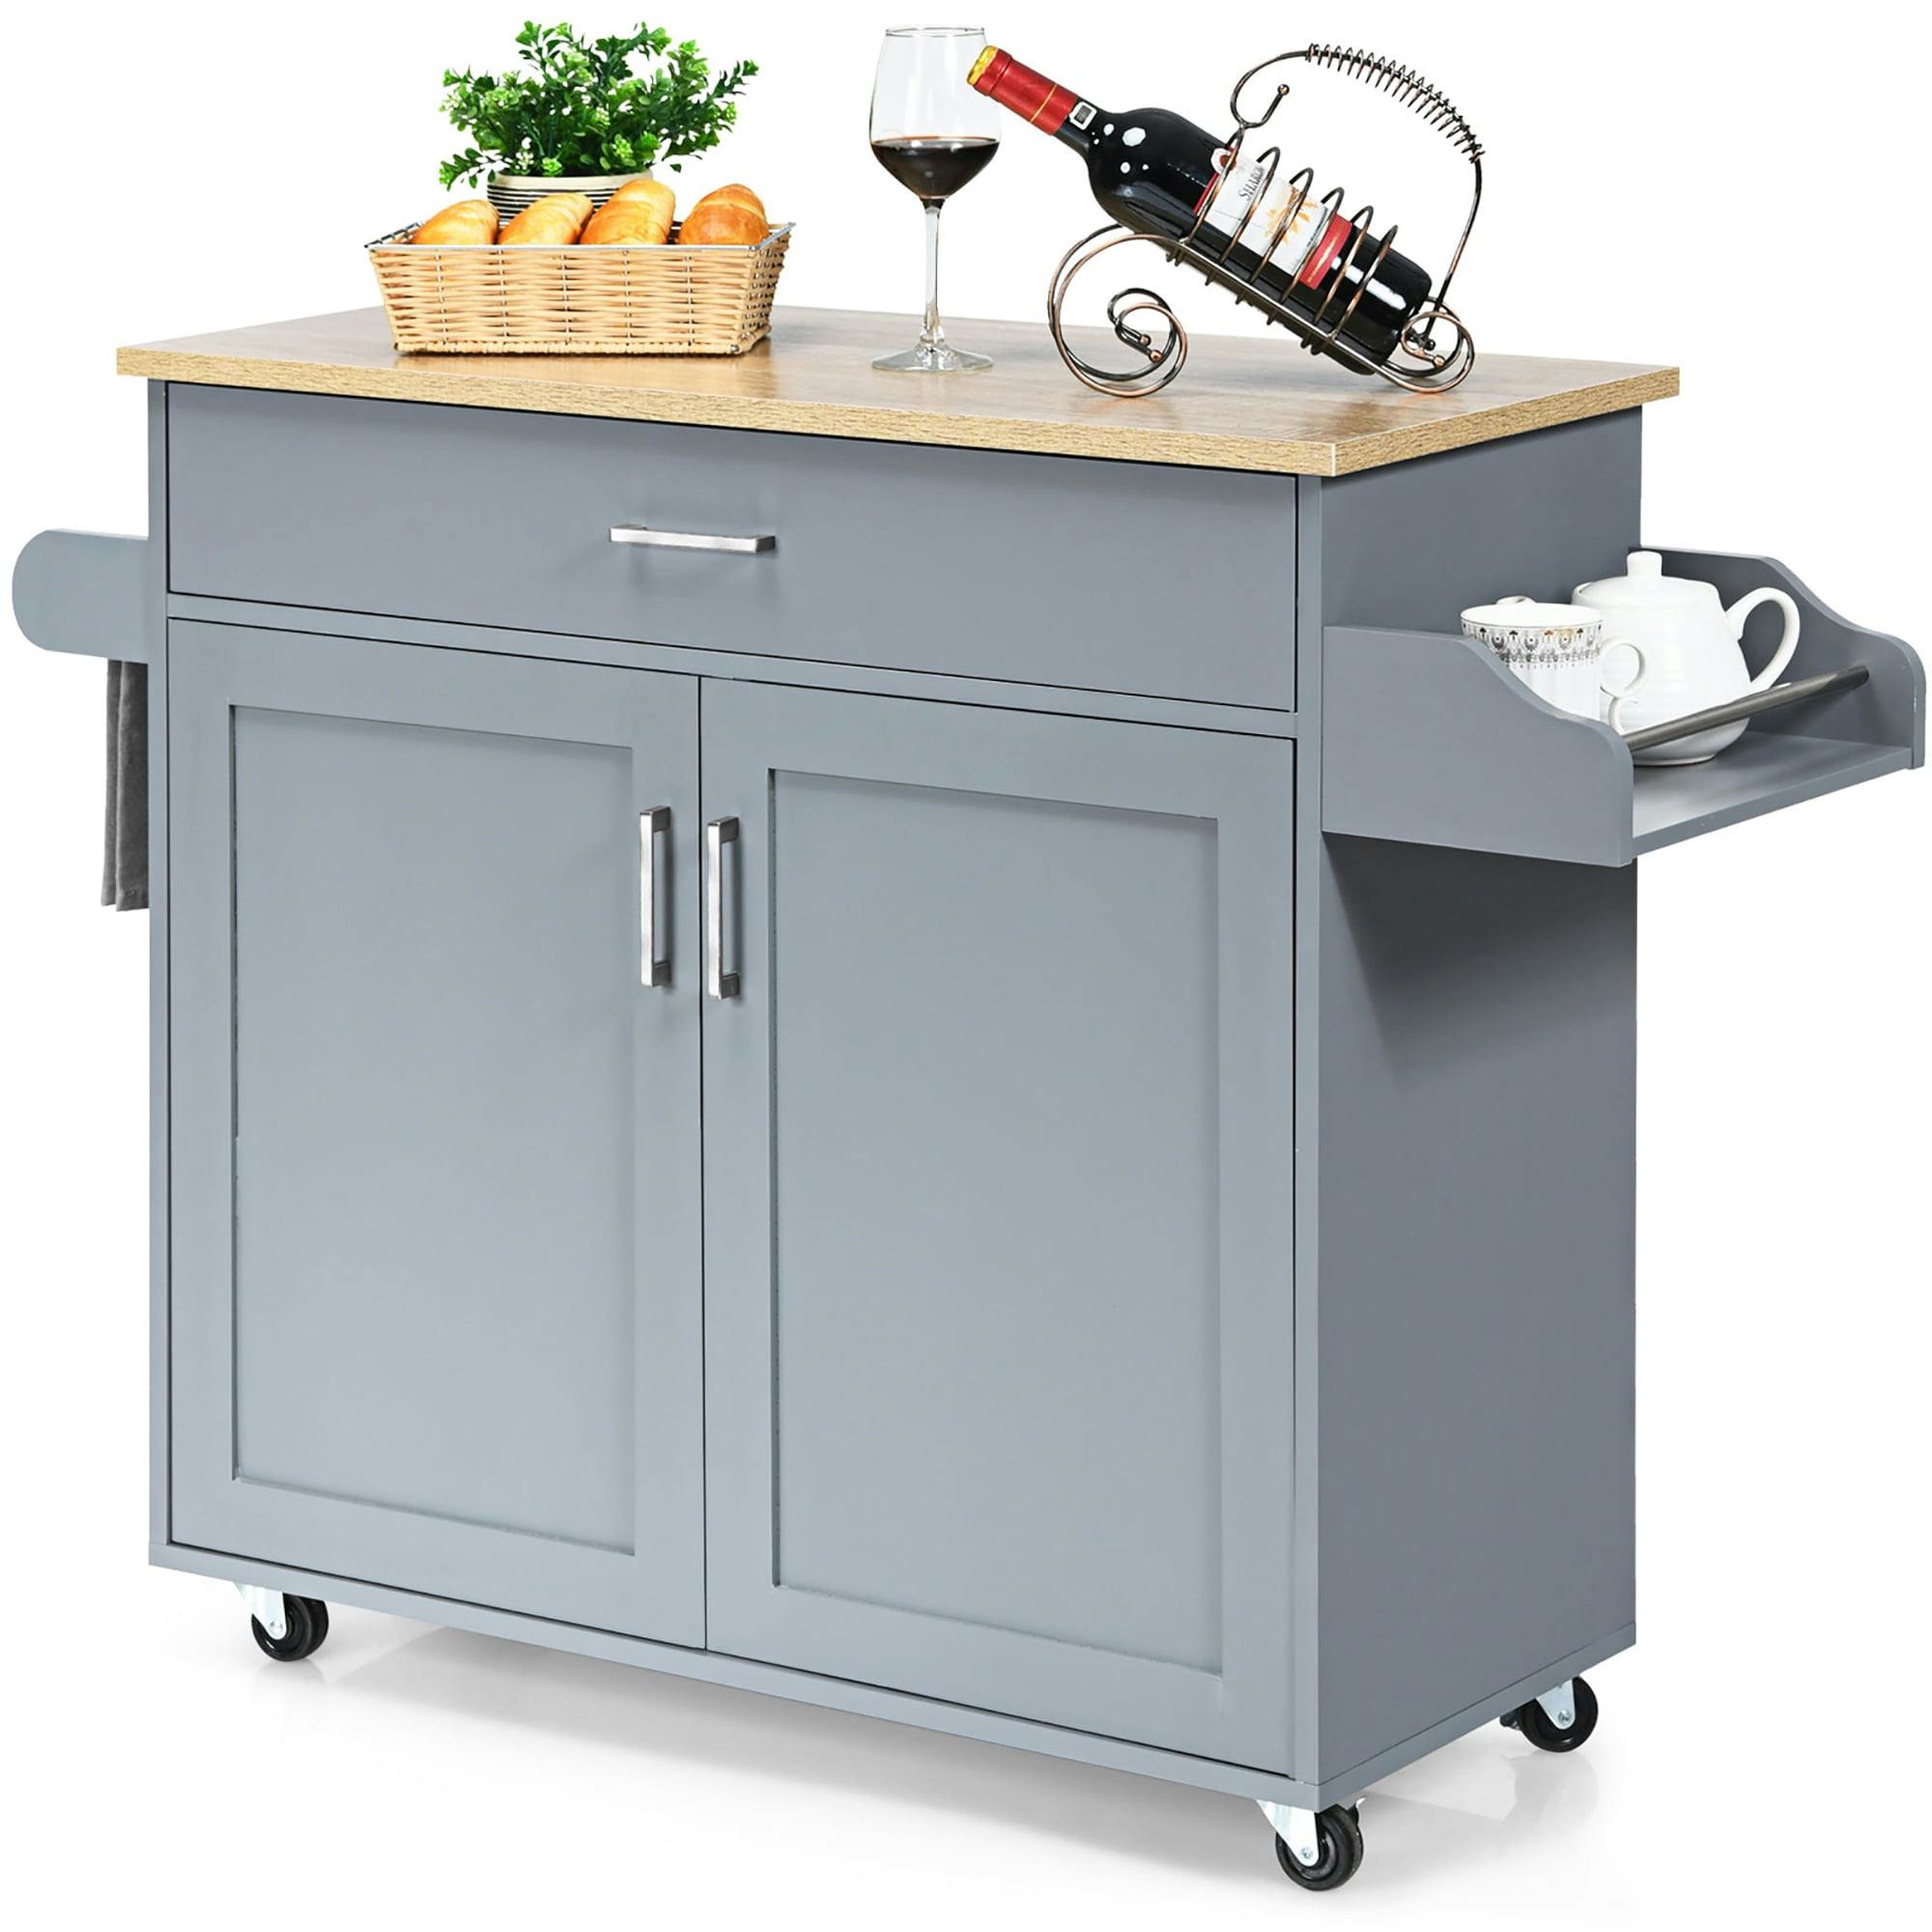 Costway Rectangular Rolling Kitchen Cart with Spice Rack in Matte Gray